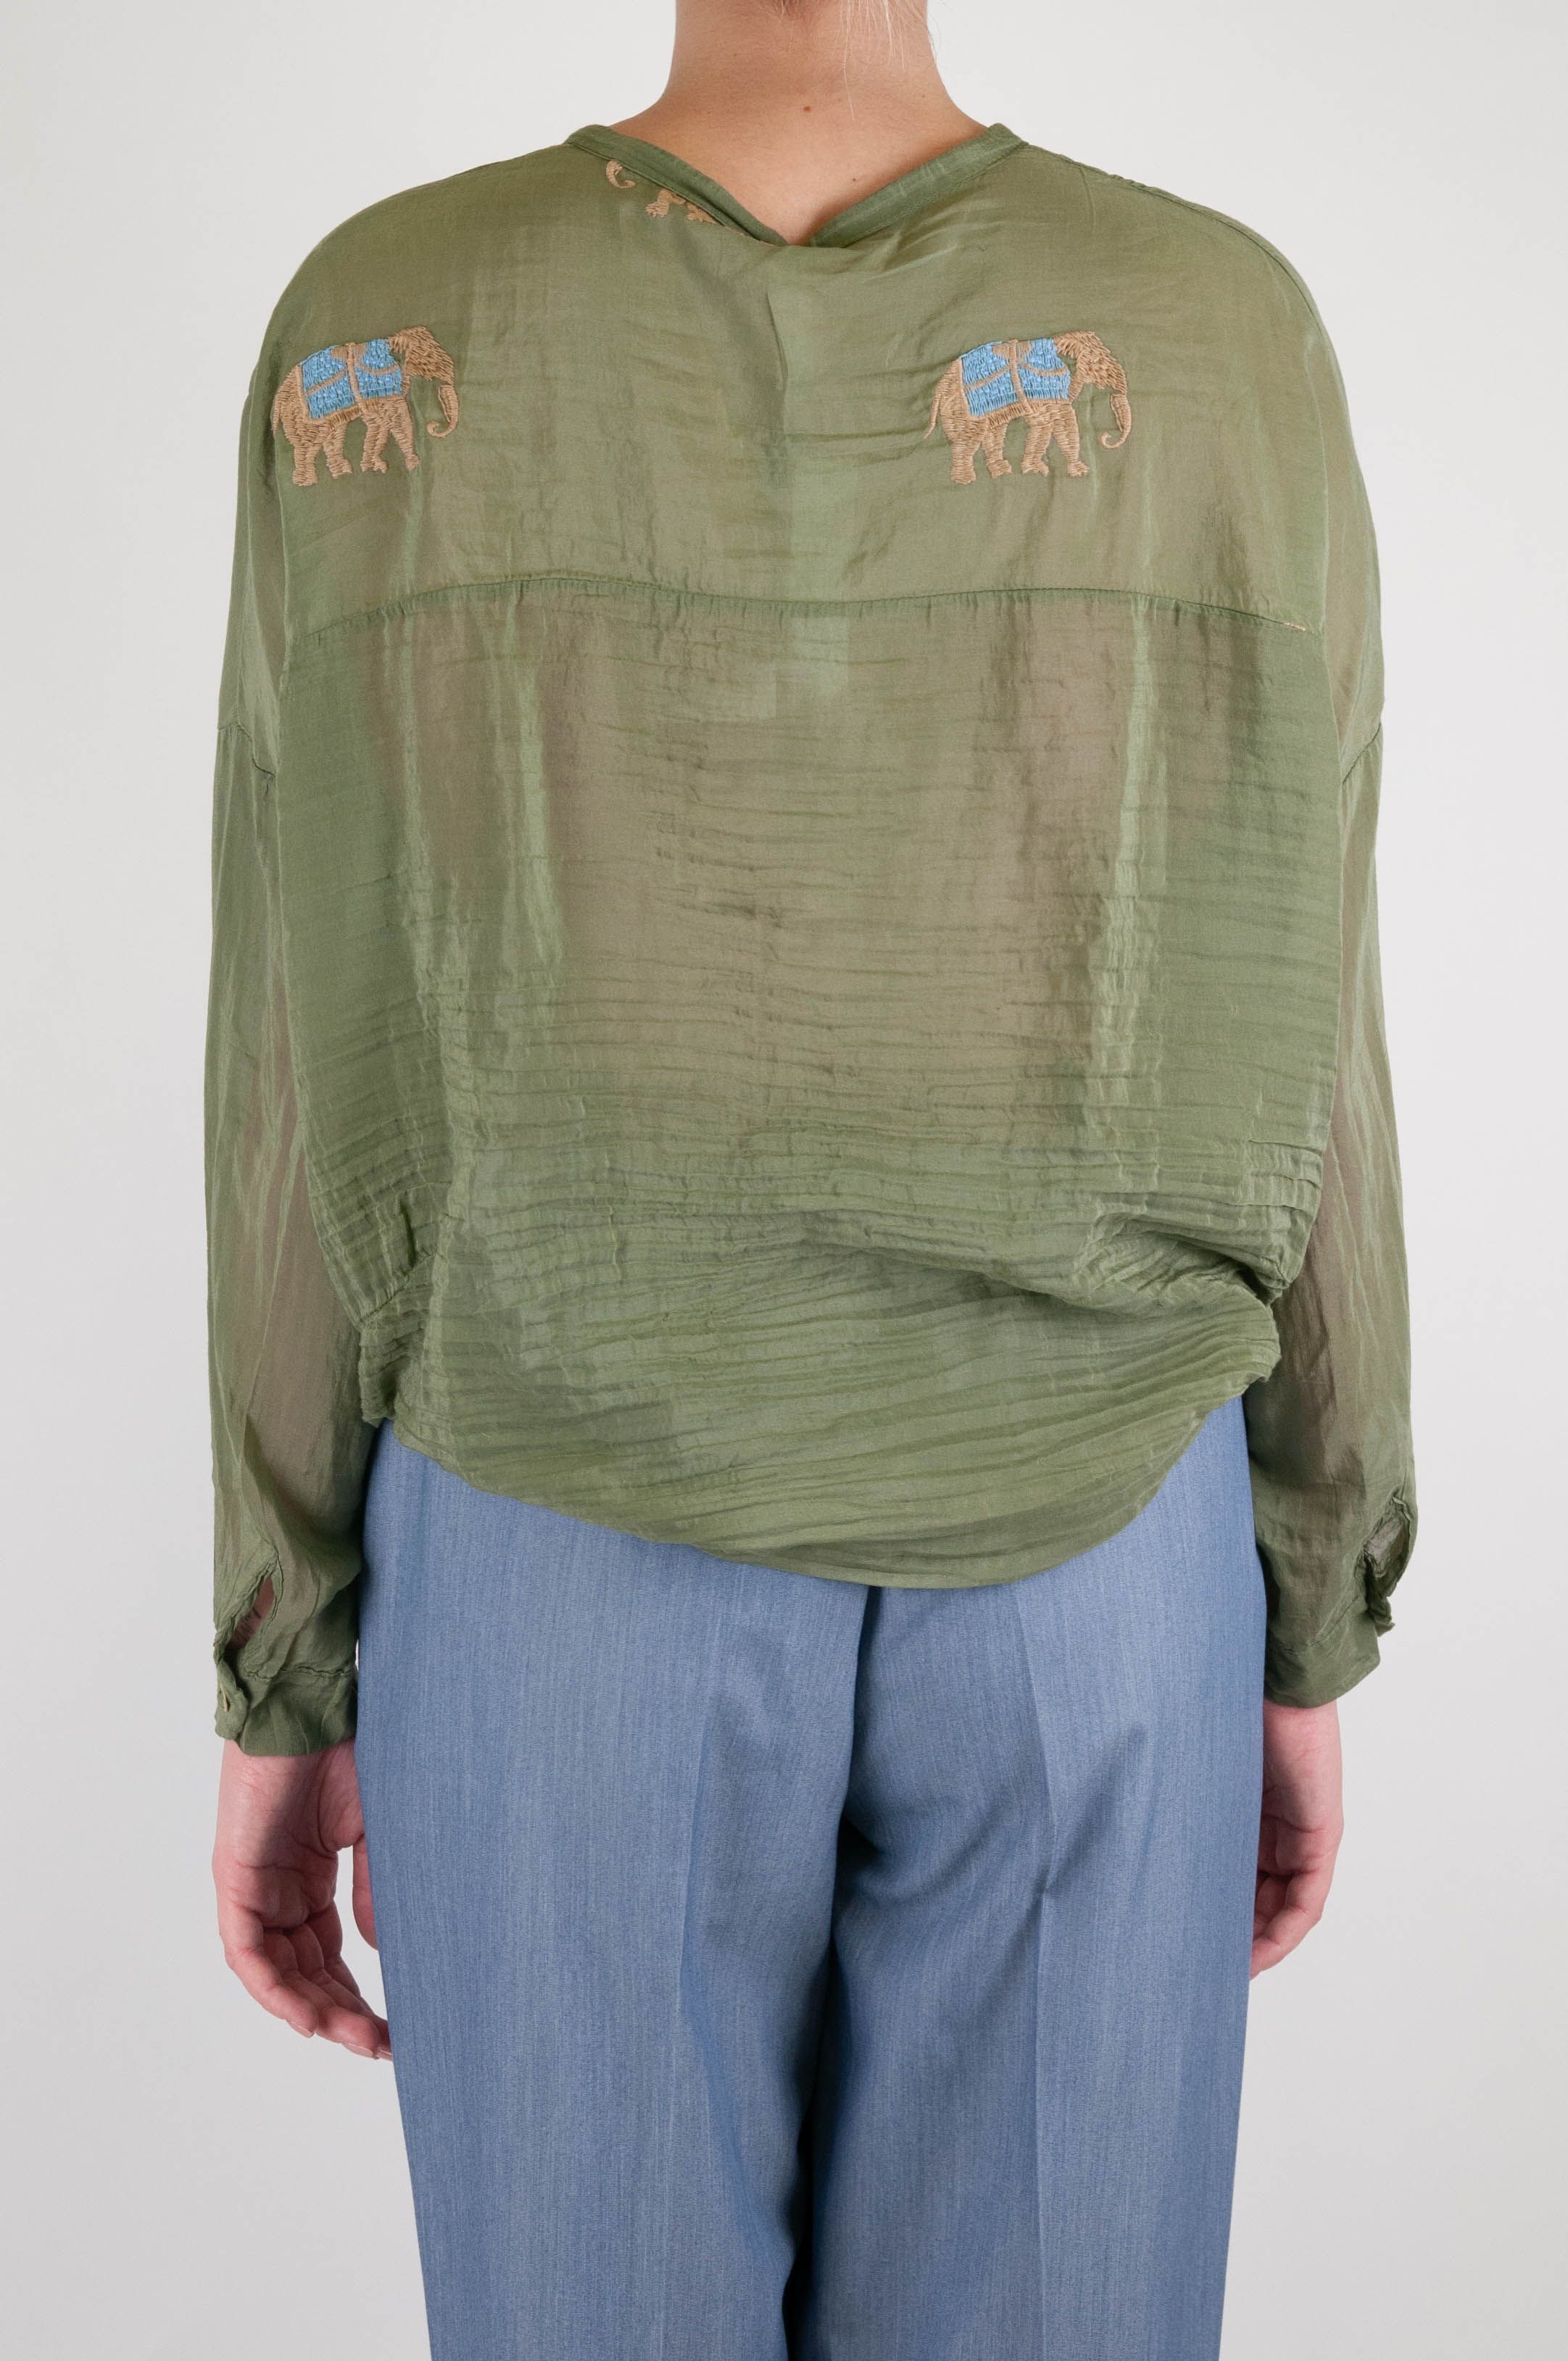 Tension in - Silk blend shirt with elephant embroidery and knot on the bottom